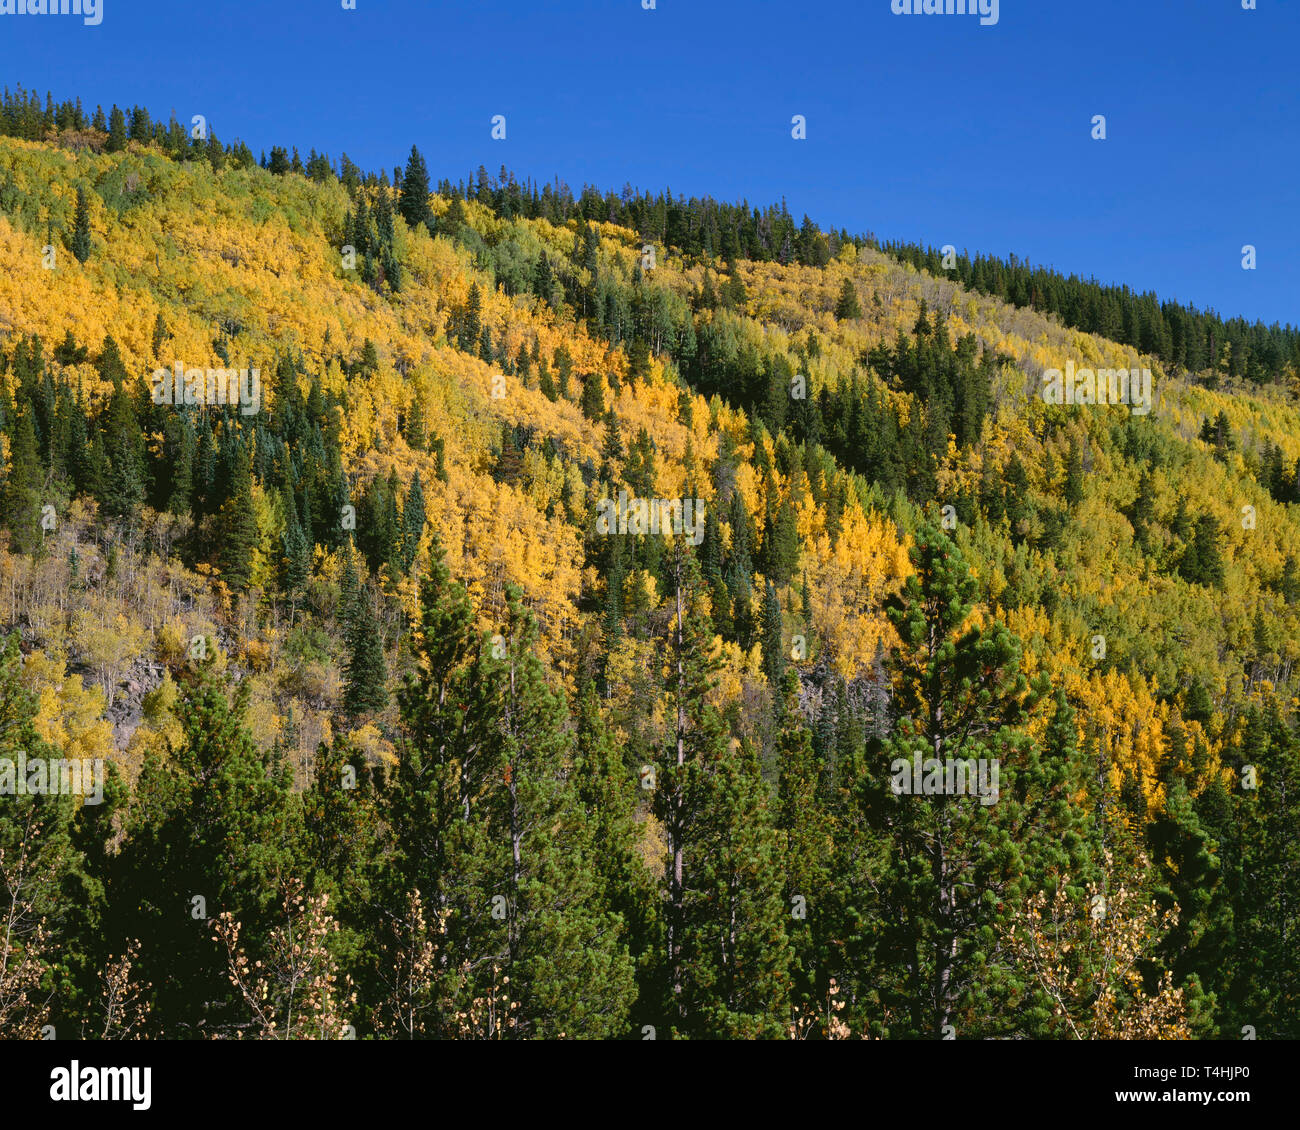 USA, Colorado, Rocky Mountain National Park, Fall colored aspen mix with conifers near Hidden Valley. Stock Photo